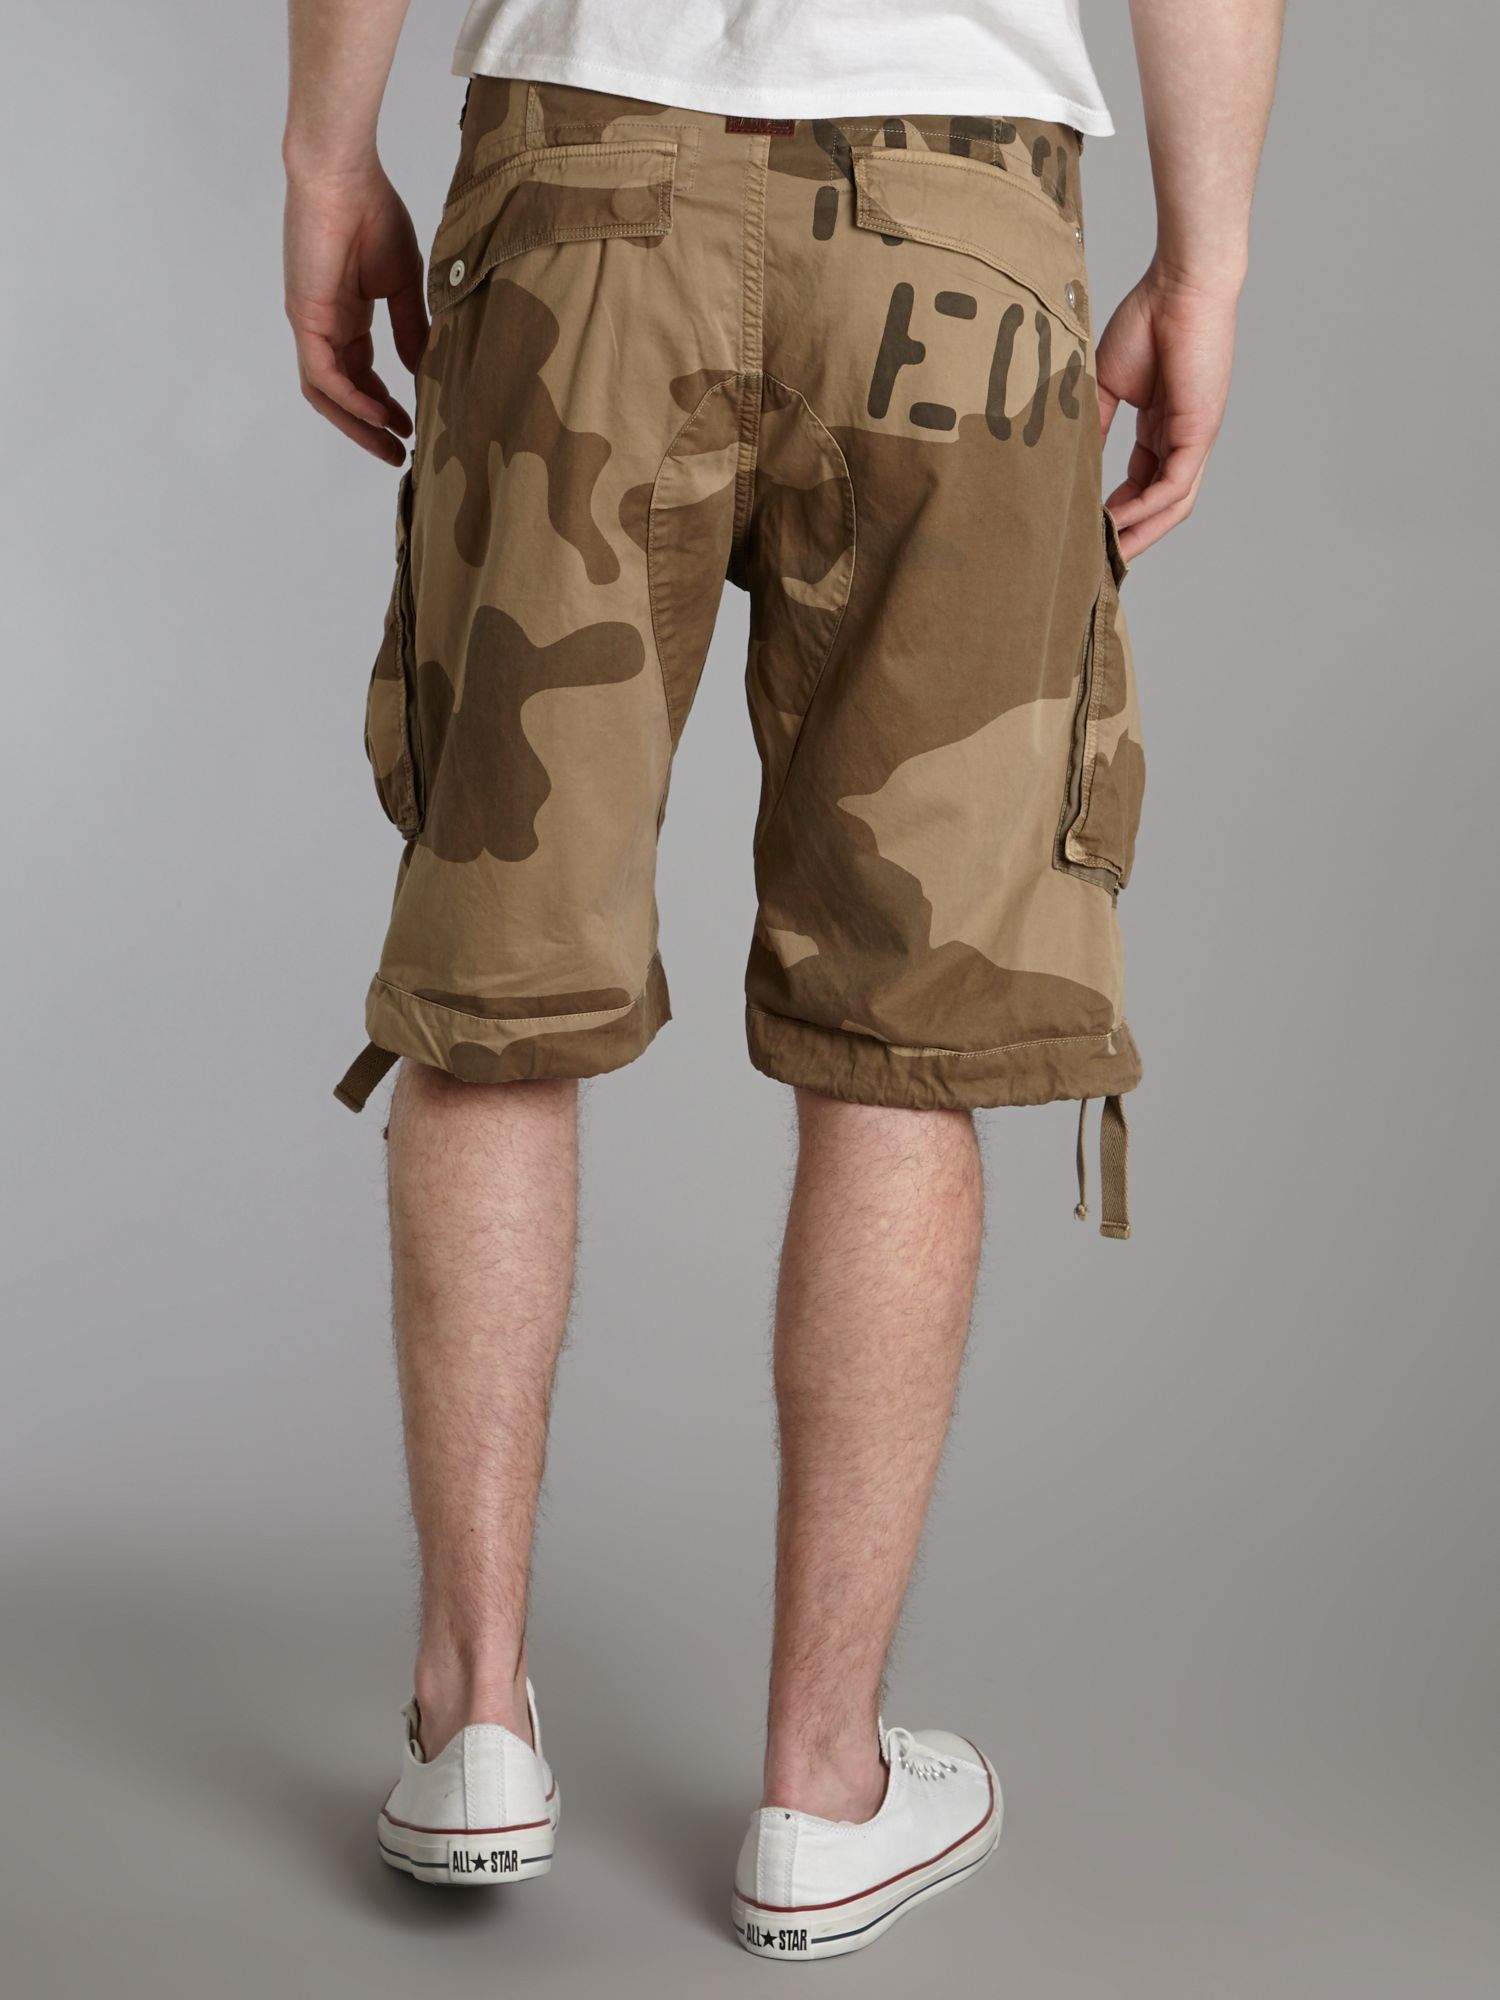 G-star raw Rovic Loose Fit Camo King Shorts in Brown for Men | Lyst